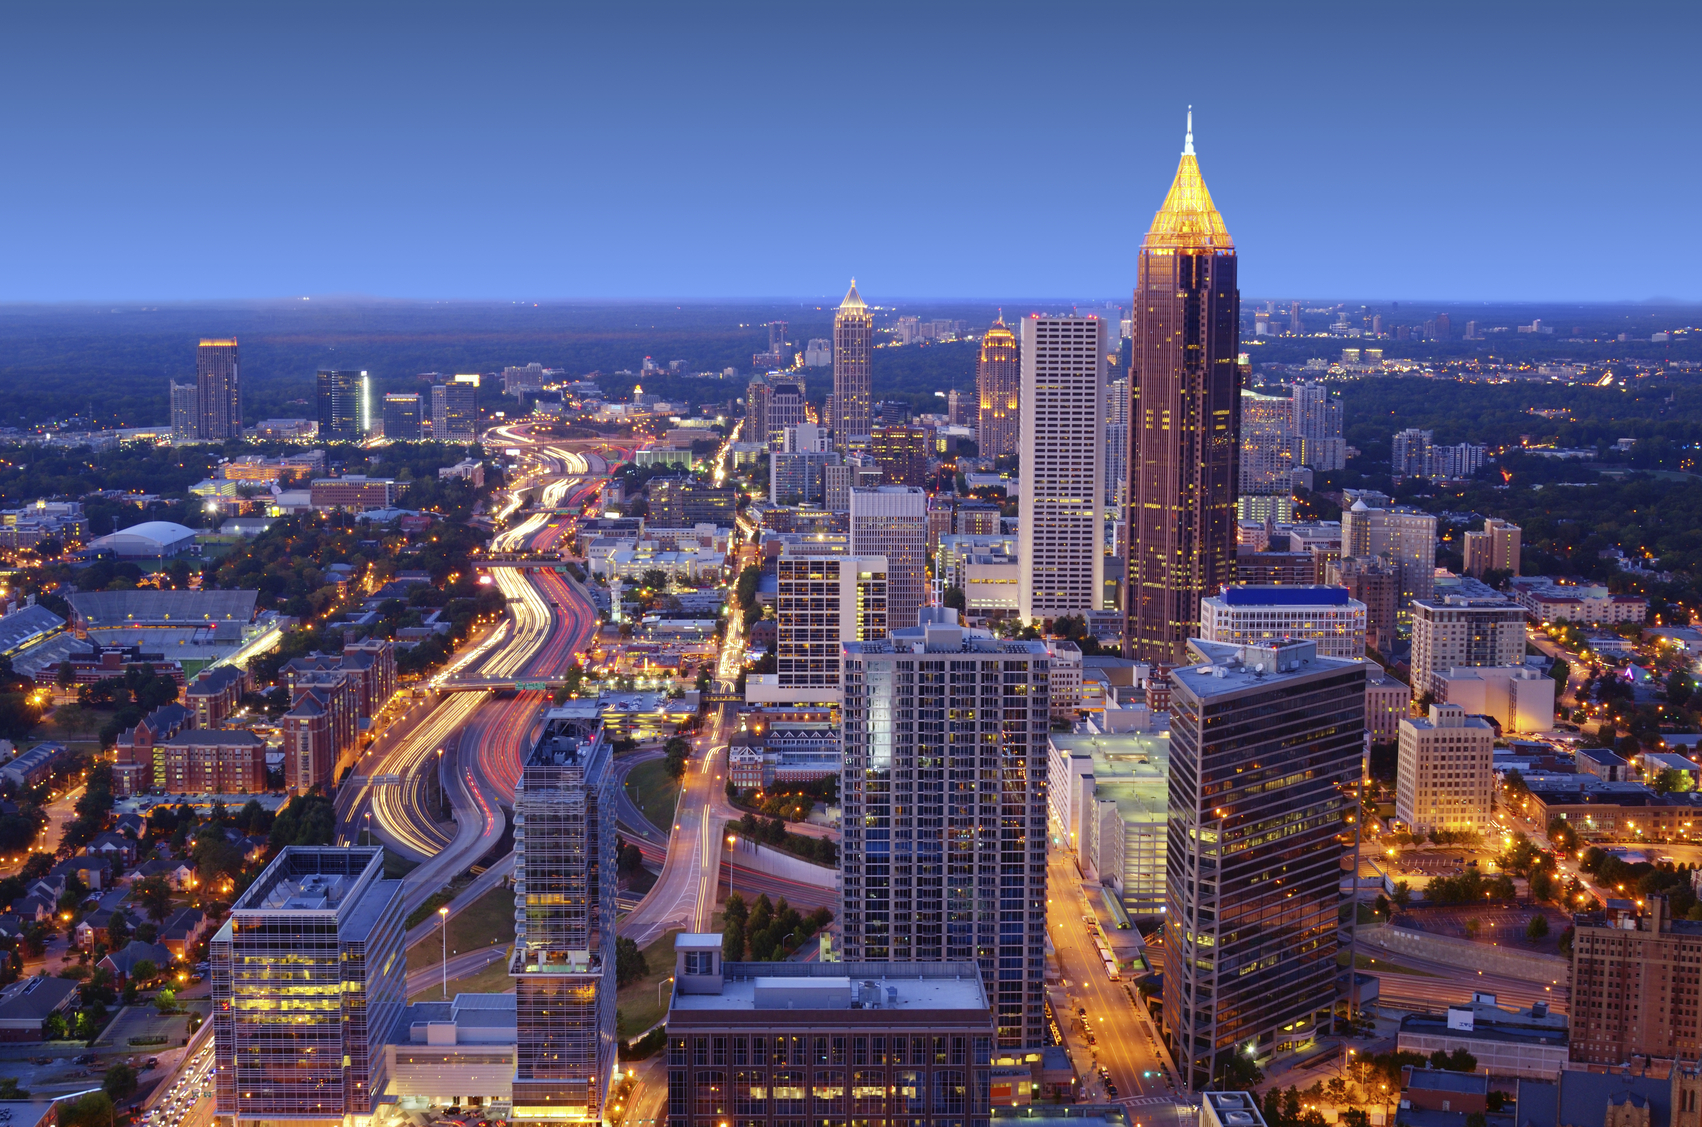 Midtown Atlanta ones selected as one of five communities across America by the American Planning Association as being one of the country's great neighborhoods.